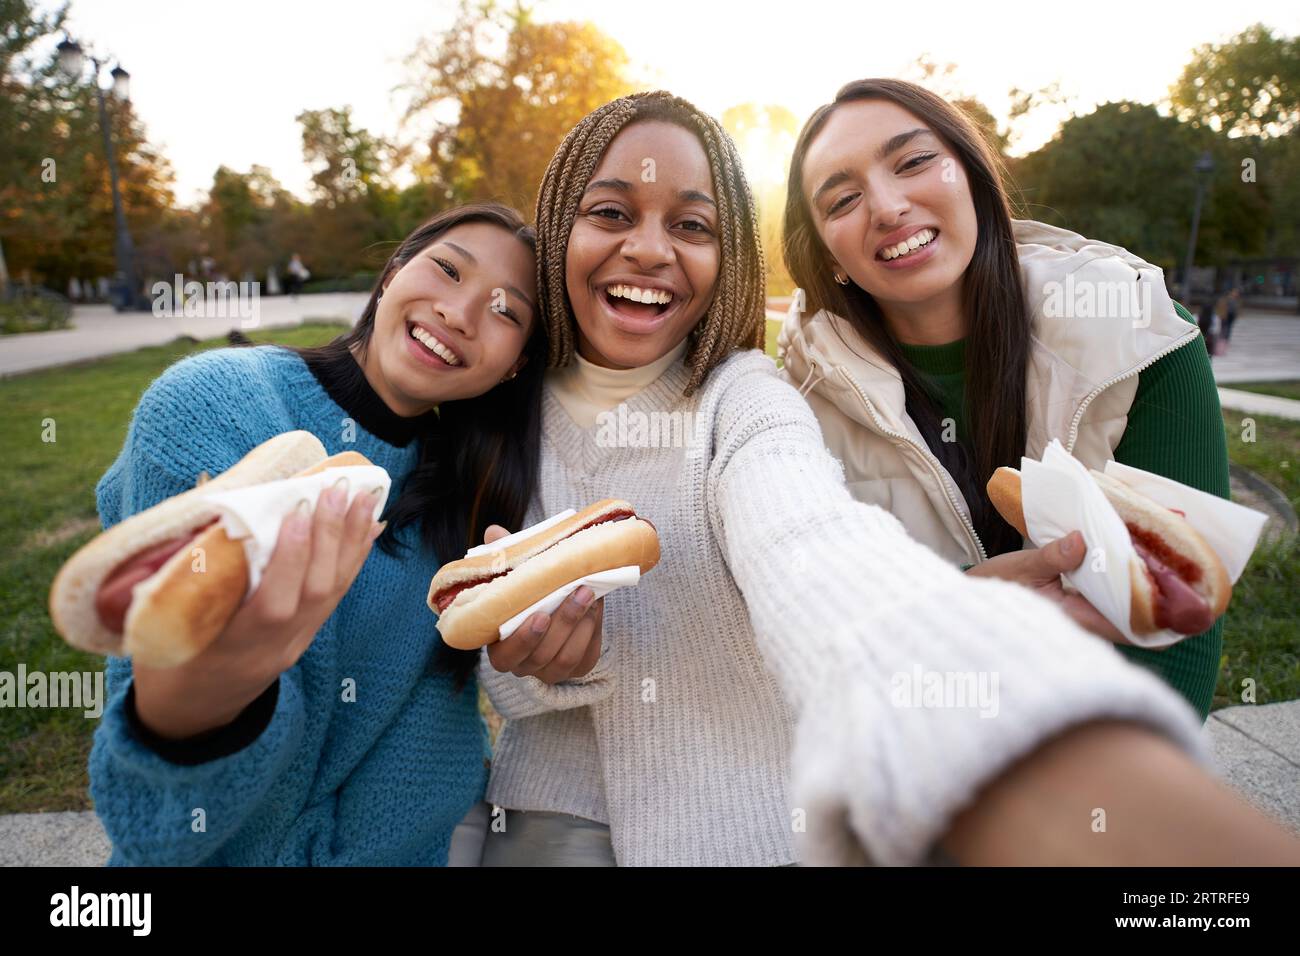 Group cheerful girls take selfie eating takeaway street food sitting on bench in nice area of city. Stock Photo